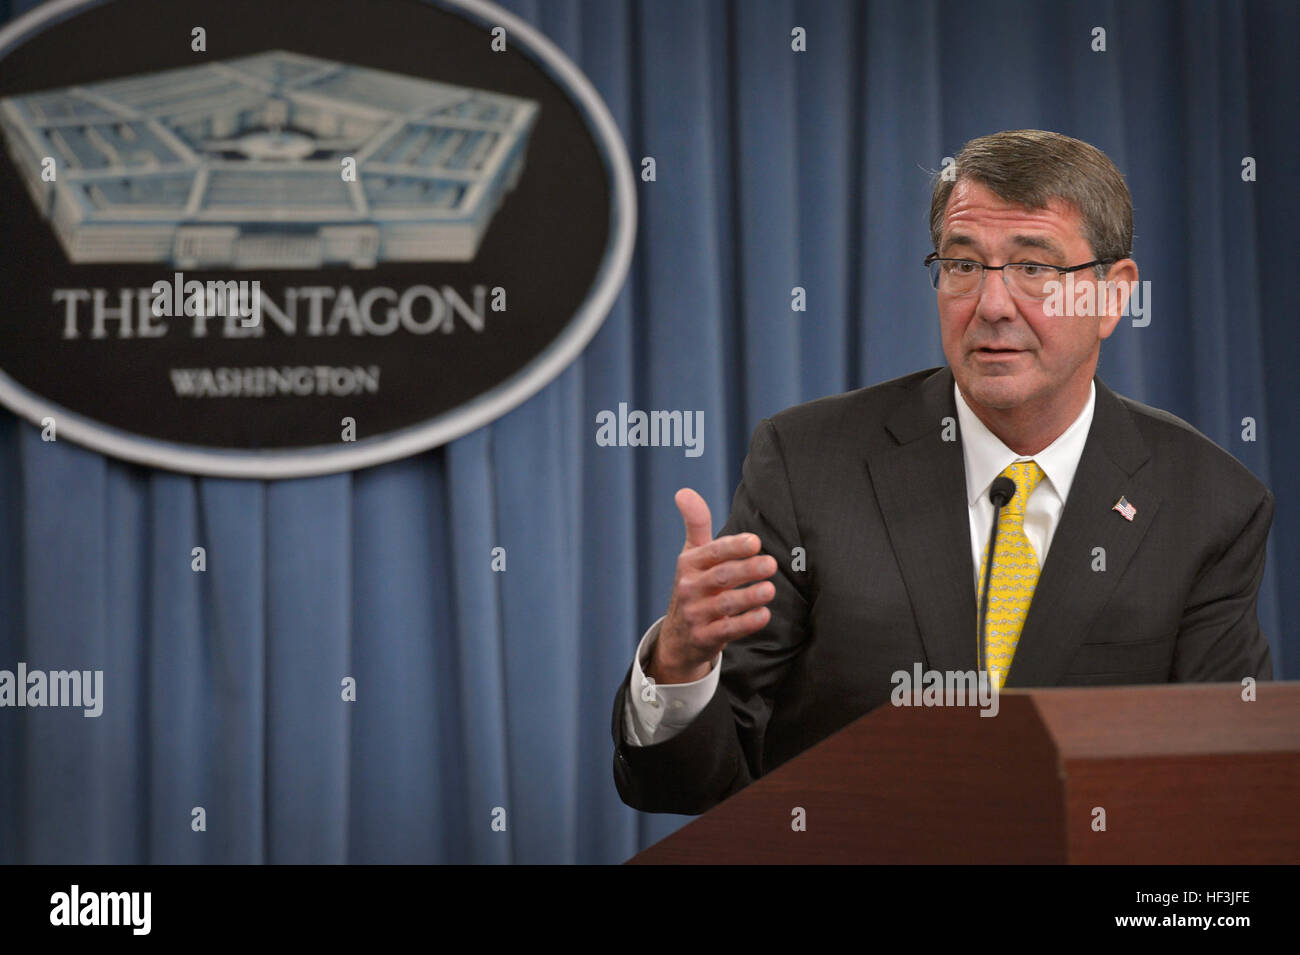 Secretary of Defense Ash Carter conducts a press briefing at the Pentagon Aug. 20, 2015. Carter answered questions from the media on a variety of issues including regional threats across the globe and potential logjams in Congress over the budget this fall. Carter also pointed out the recent graduation of the first two female soldiers of Army Ranger School, a significant milestone in DoD's plan to test the integration of women in combatant roles. (DoD Photo by Glenn Fawcett/Released) Defense secretary congratulates first female graduates of US Army Ranger School 150820-D-NI589-293 Stock Photo